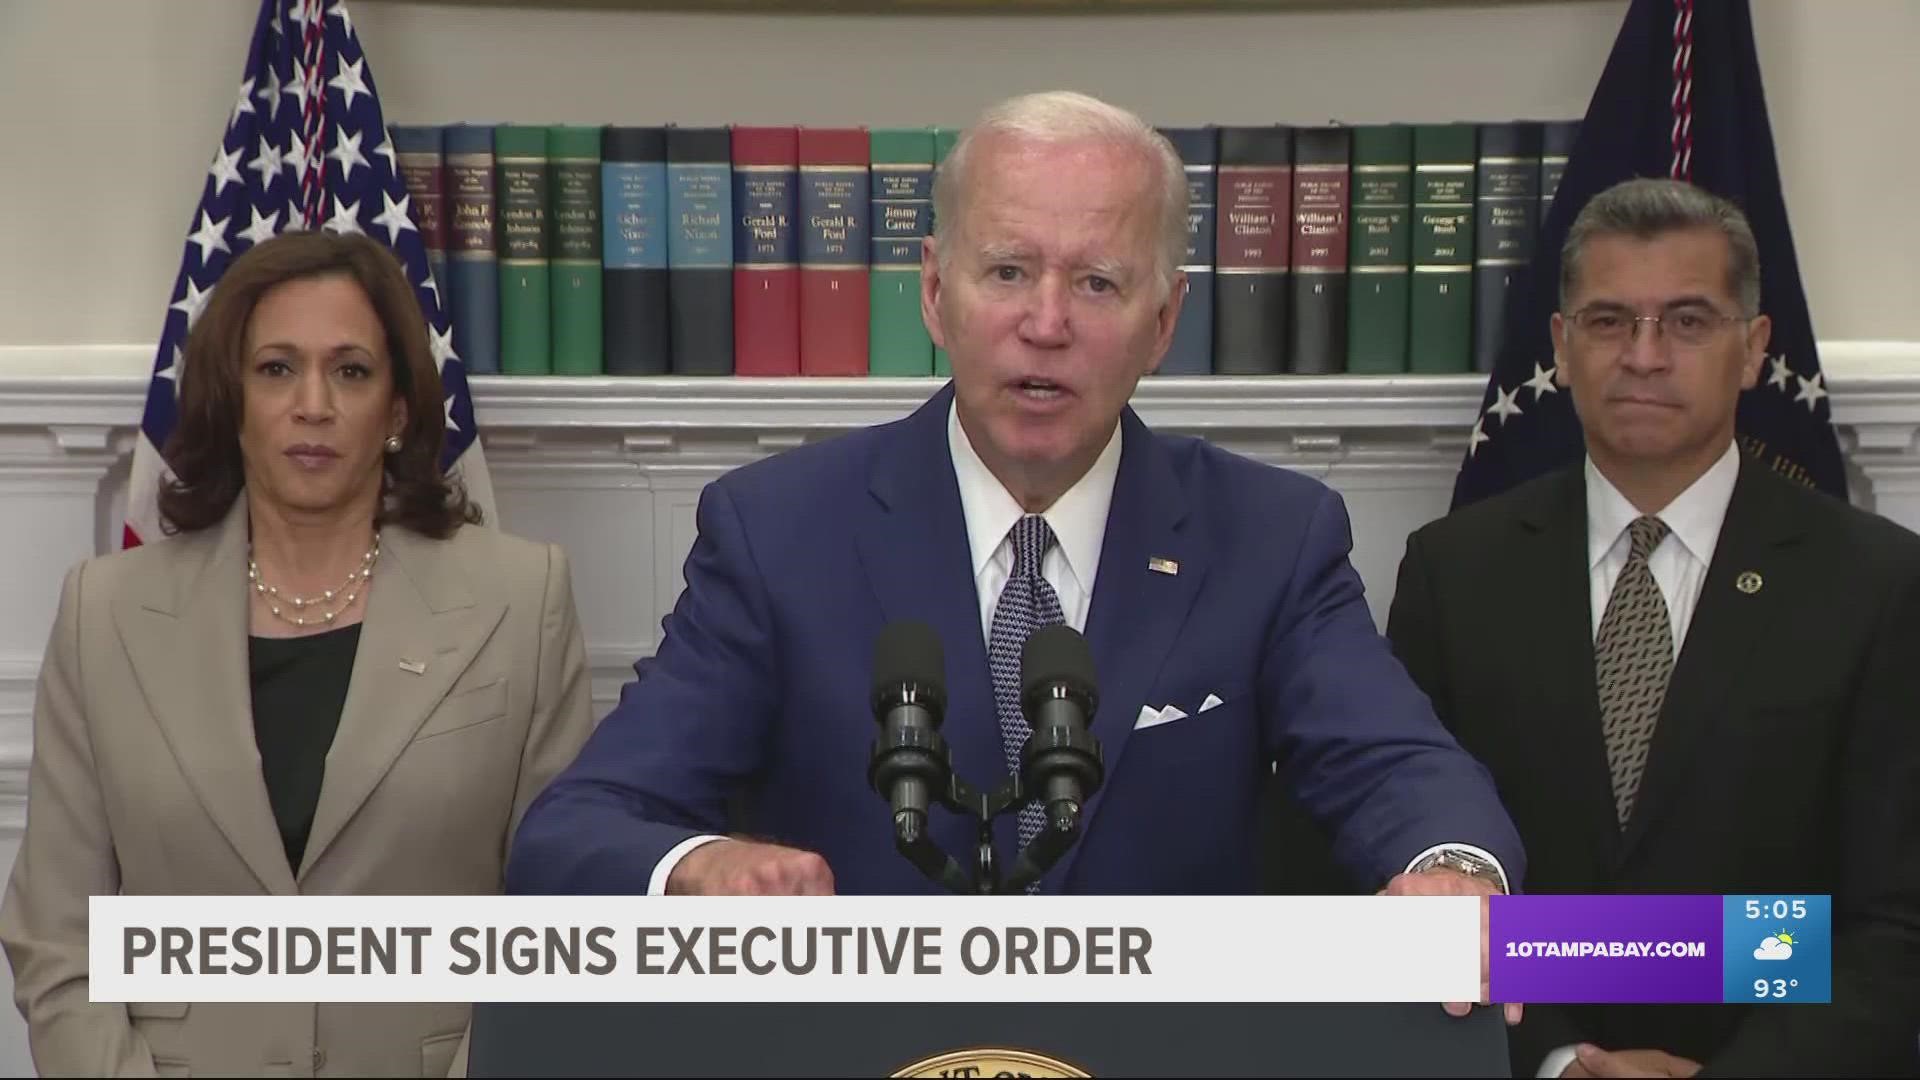 Biden is expected to formalize instructions to the Departments of Justice and Health and Human Services to push back on efforts to limit abortion access.